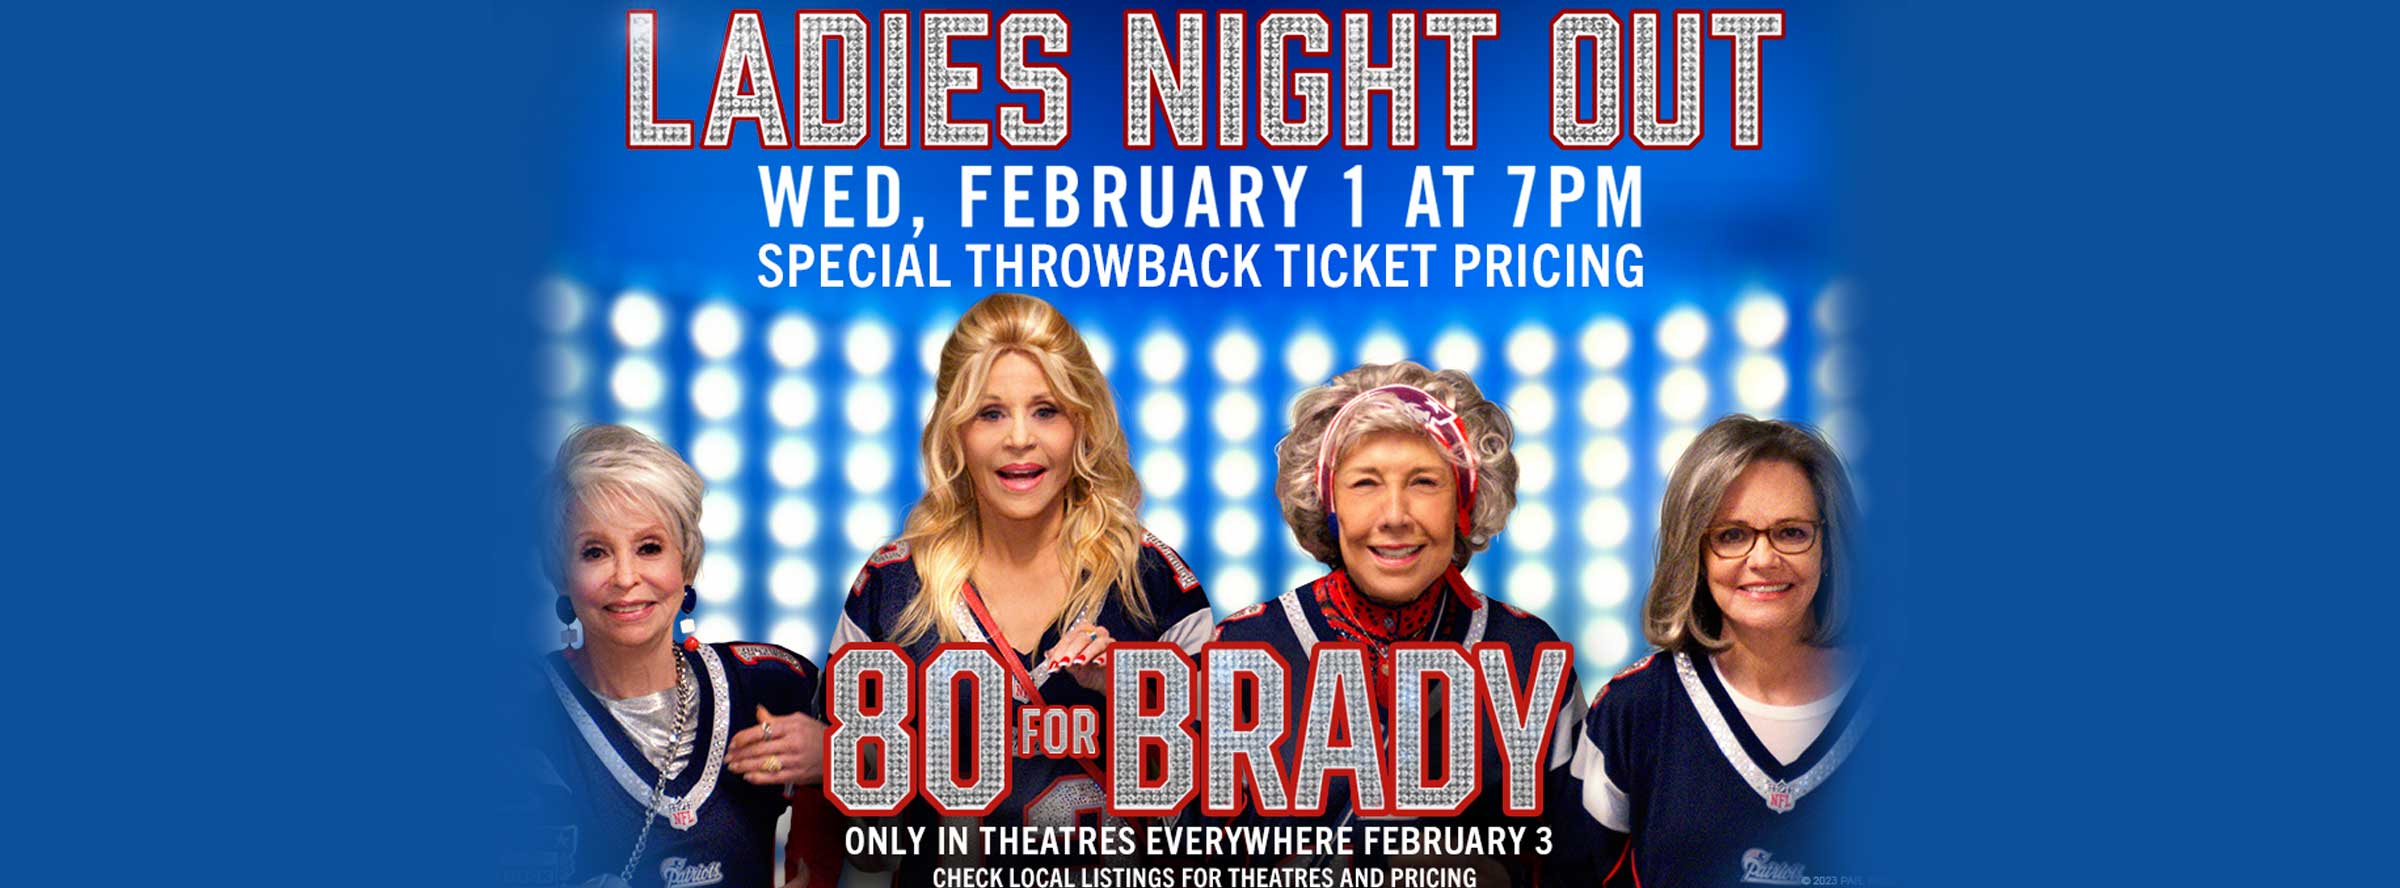 Slider Image for 80 for Brady - Ladies Night Out